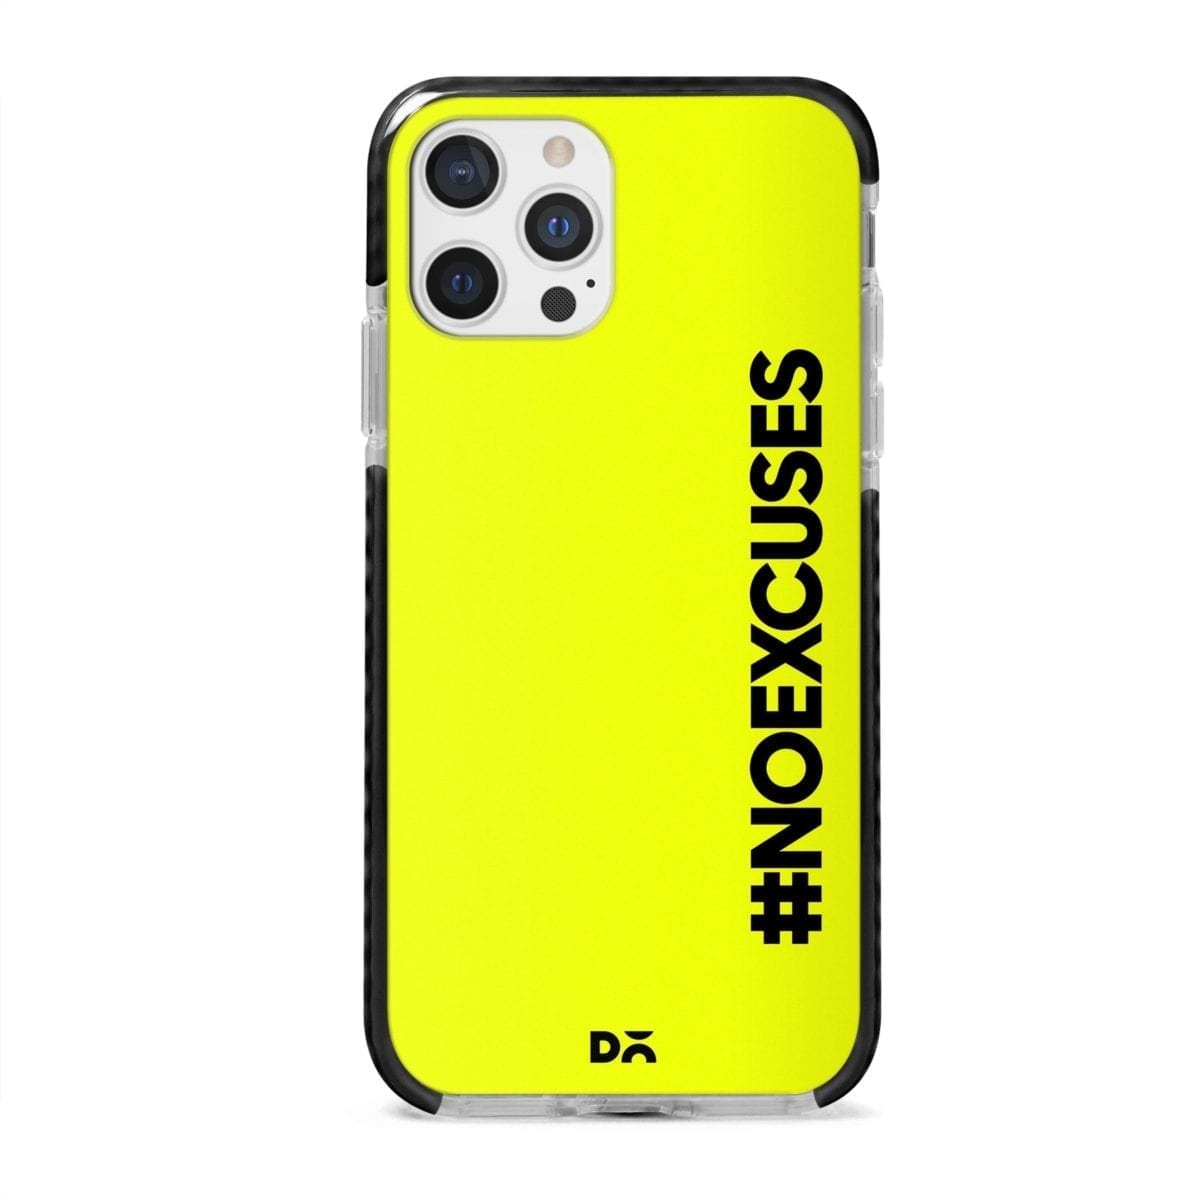 NoExcuses Stride Case Cover for Apple iPhone 12 Pro and Apple iPhone 12 Pro Max with great design and shock proof | Klippik | Online Shopping | Kuwait UAE Saudi